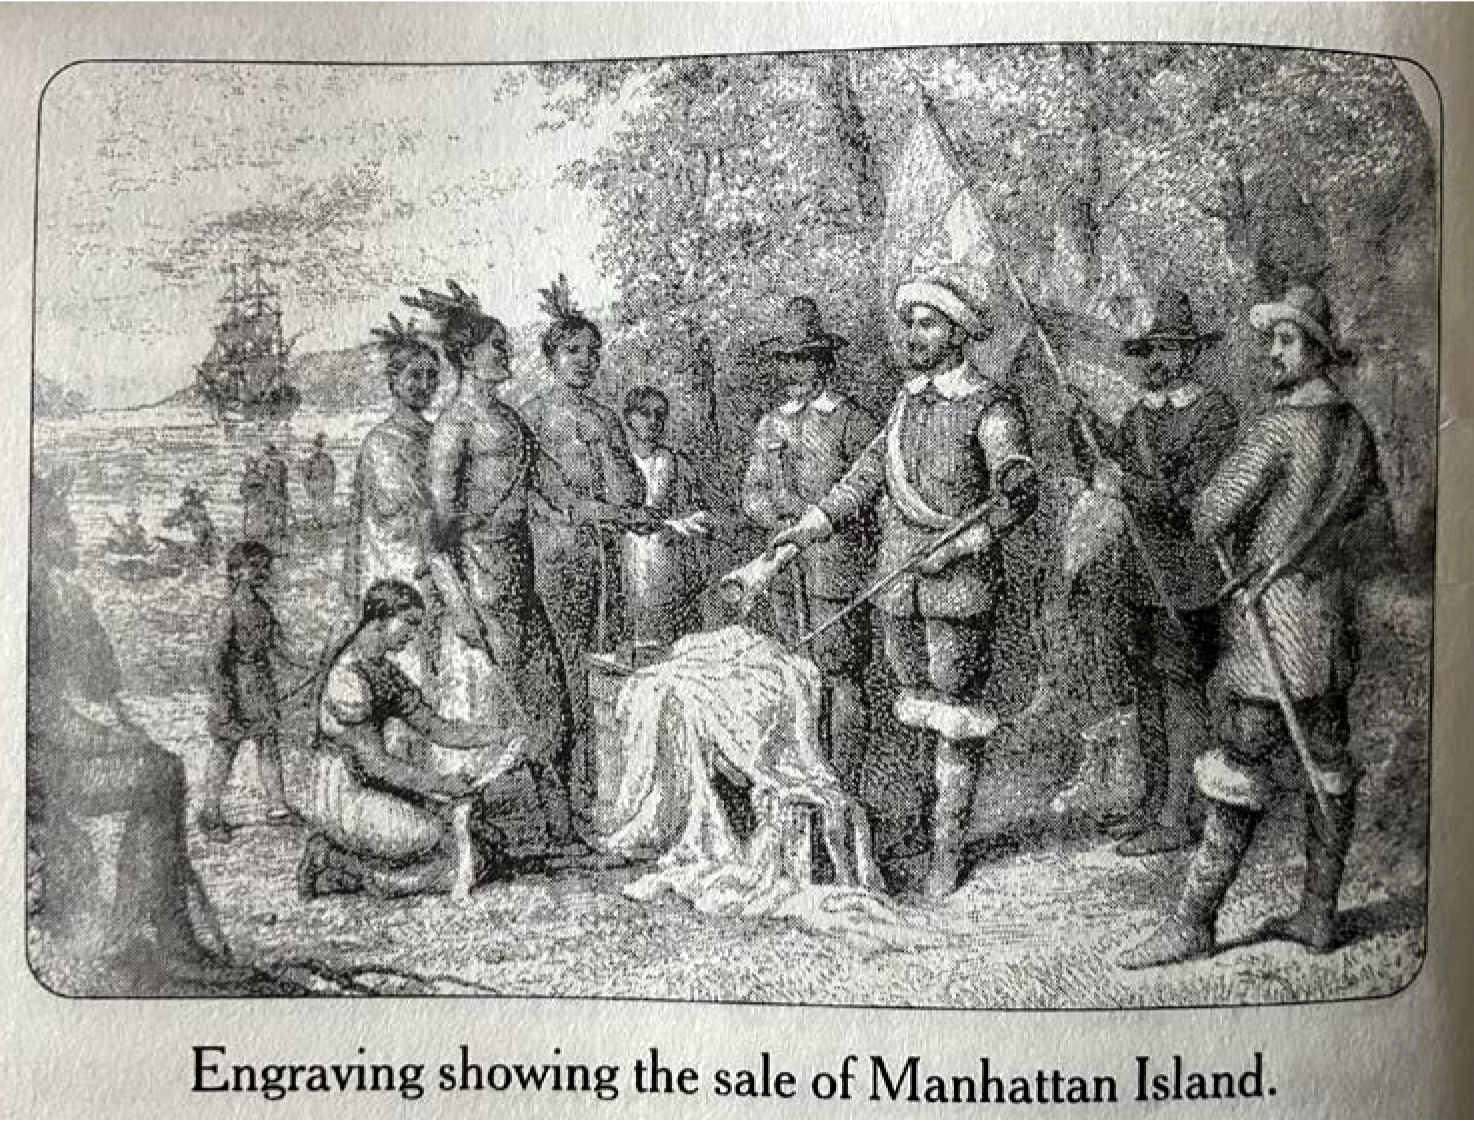 Engraving showing the sale of Manhattan Island.   Source: Hearth, Amy Hill. “Strong Medicine” Speaks: A Native American Elder Has Her Say. New York: Atria Books, 2008. P.4